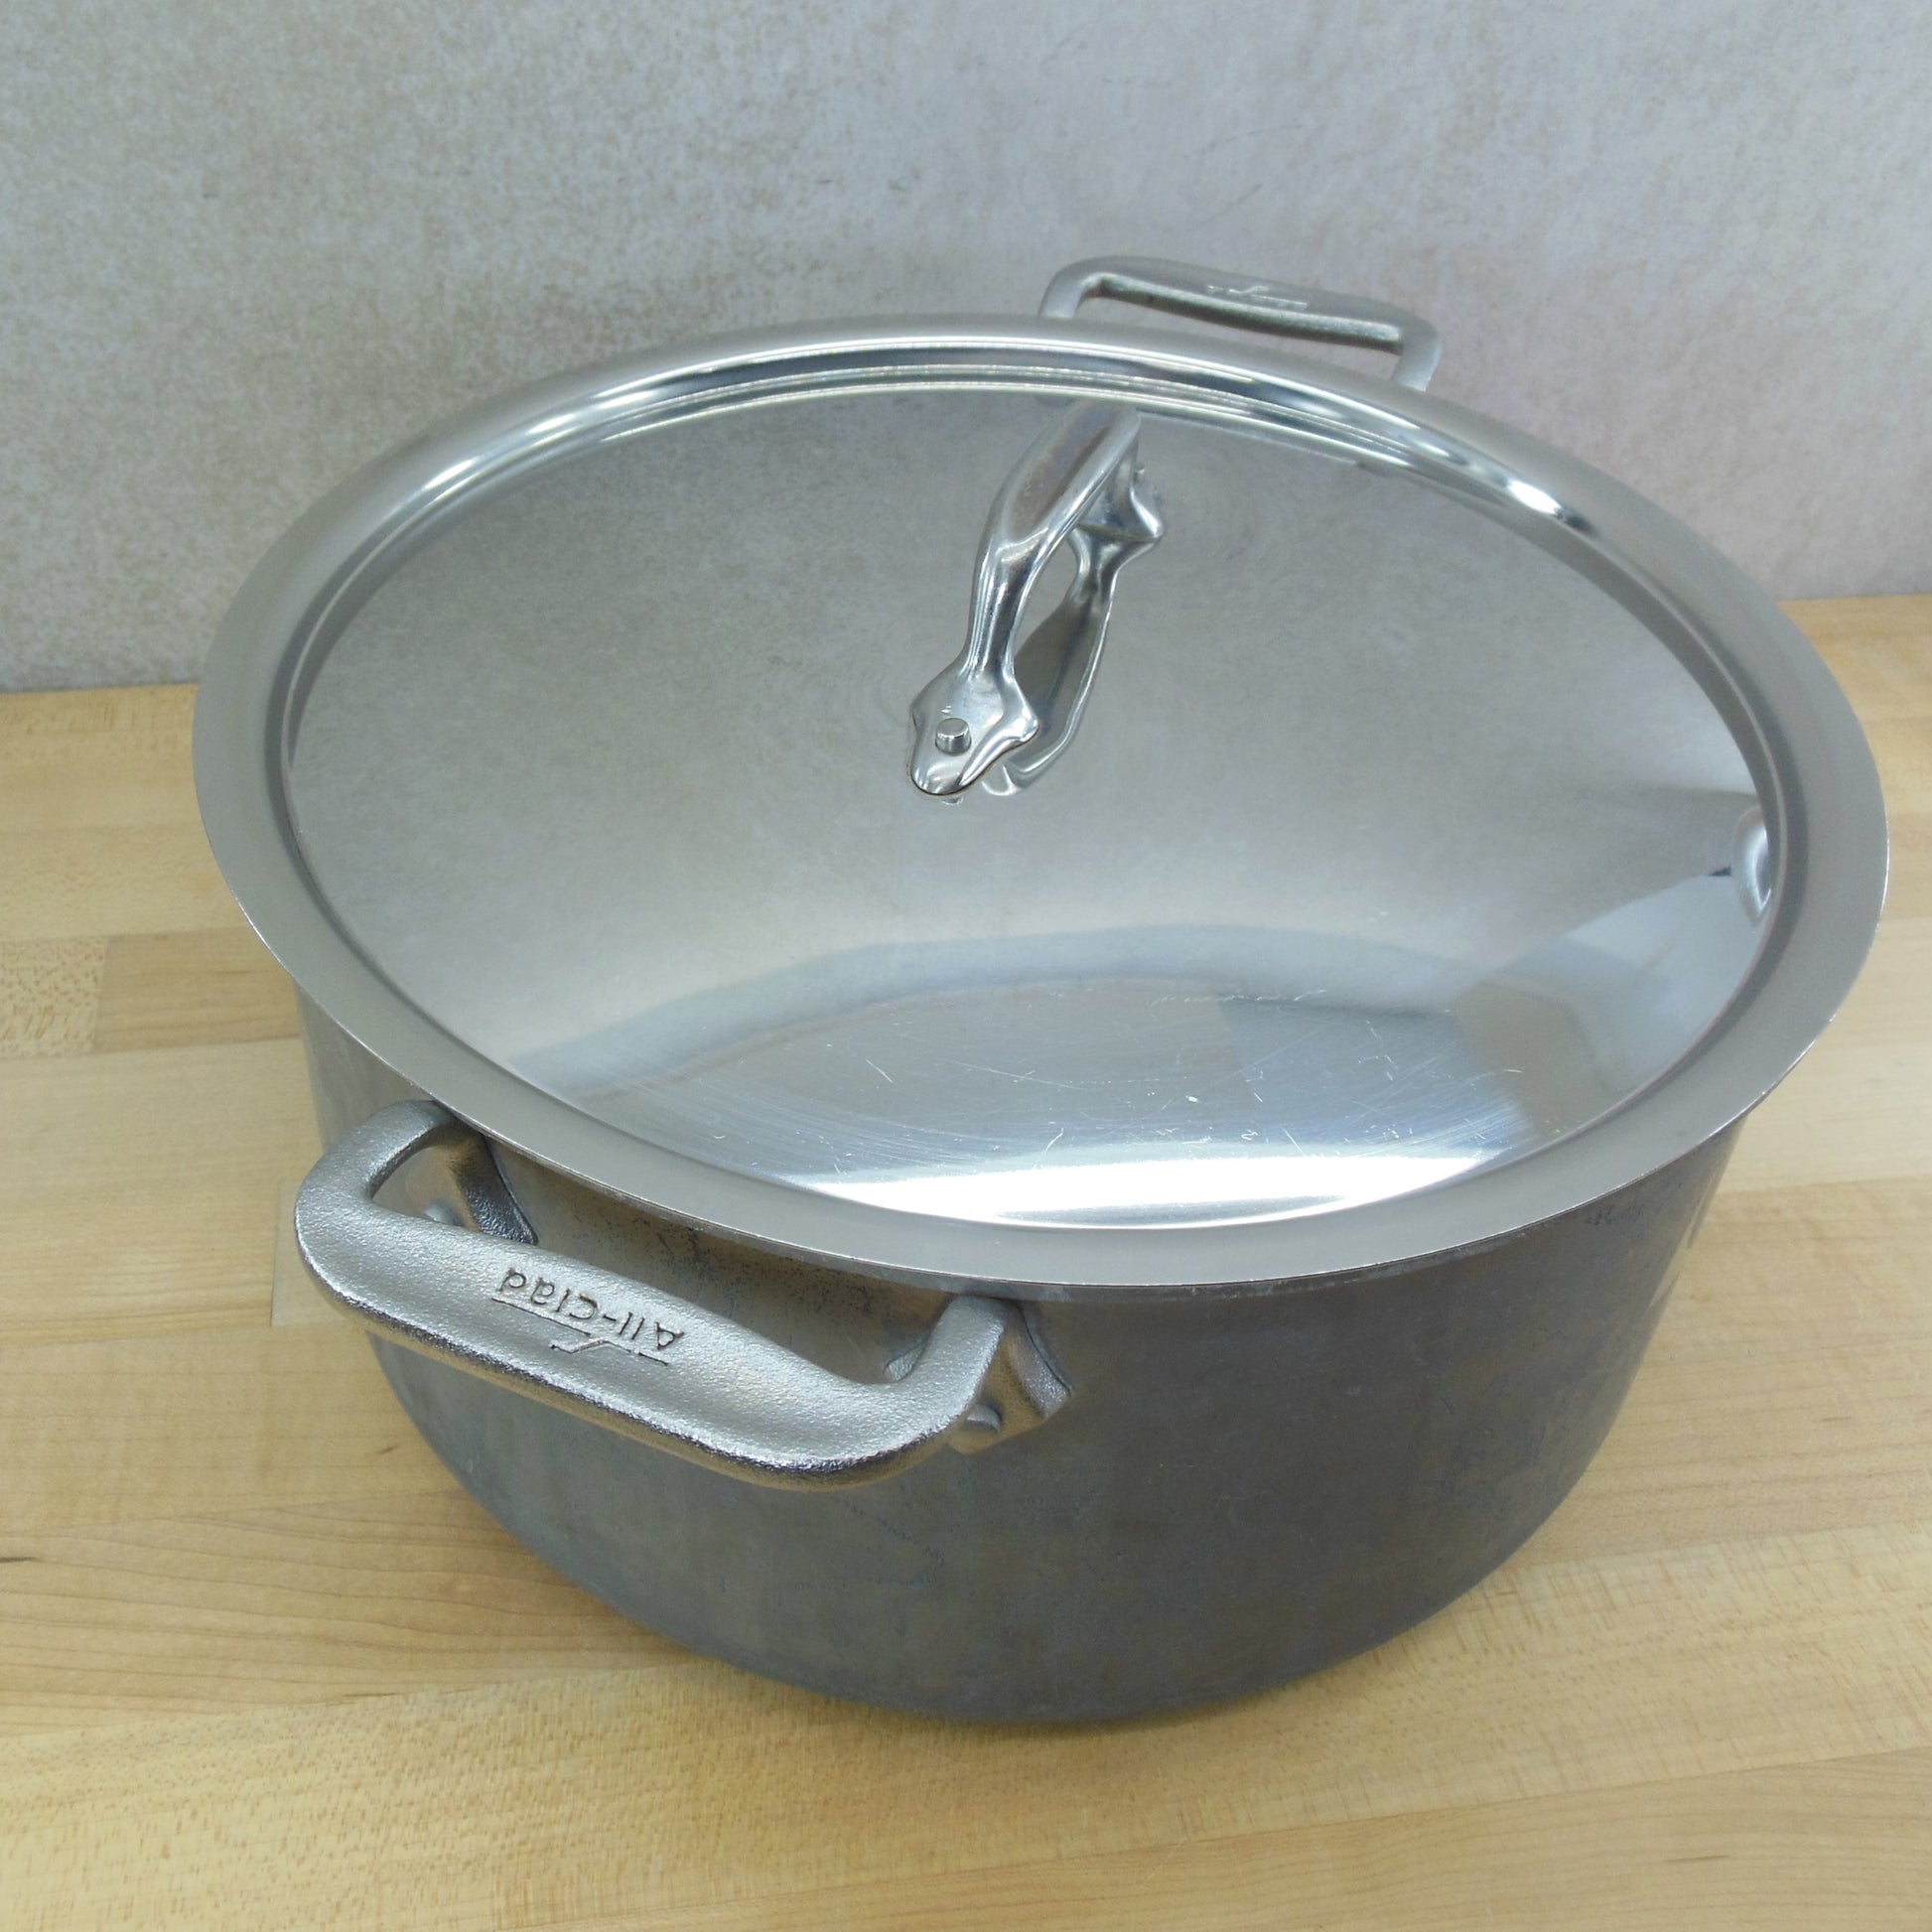 All-Clad Ltd USA 8 Quart Stock Soup Pot Stainless Steel - Discounted lid cover